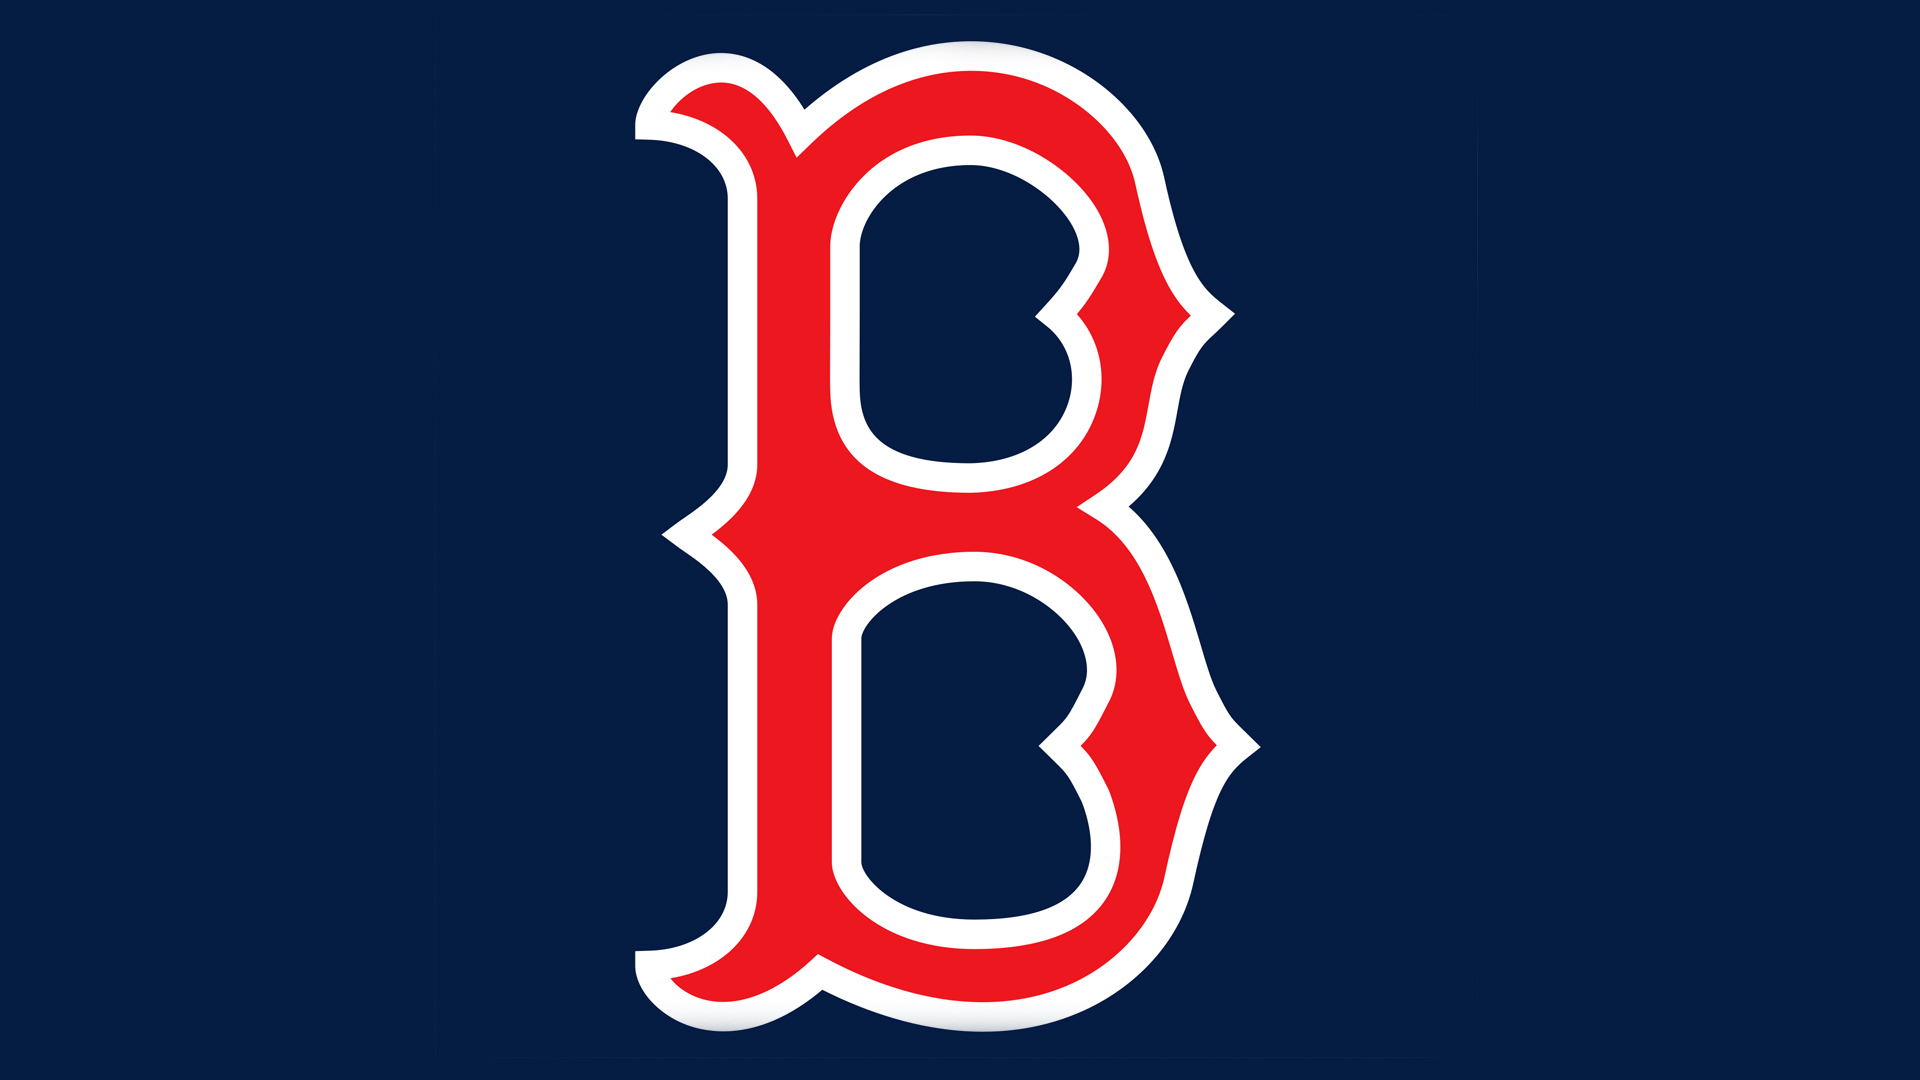 Red Sox Wallpapers HD